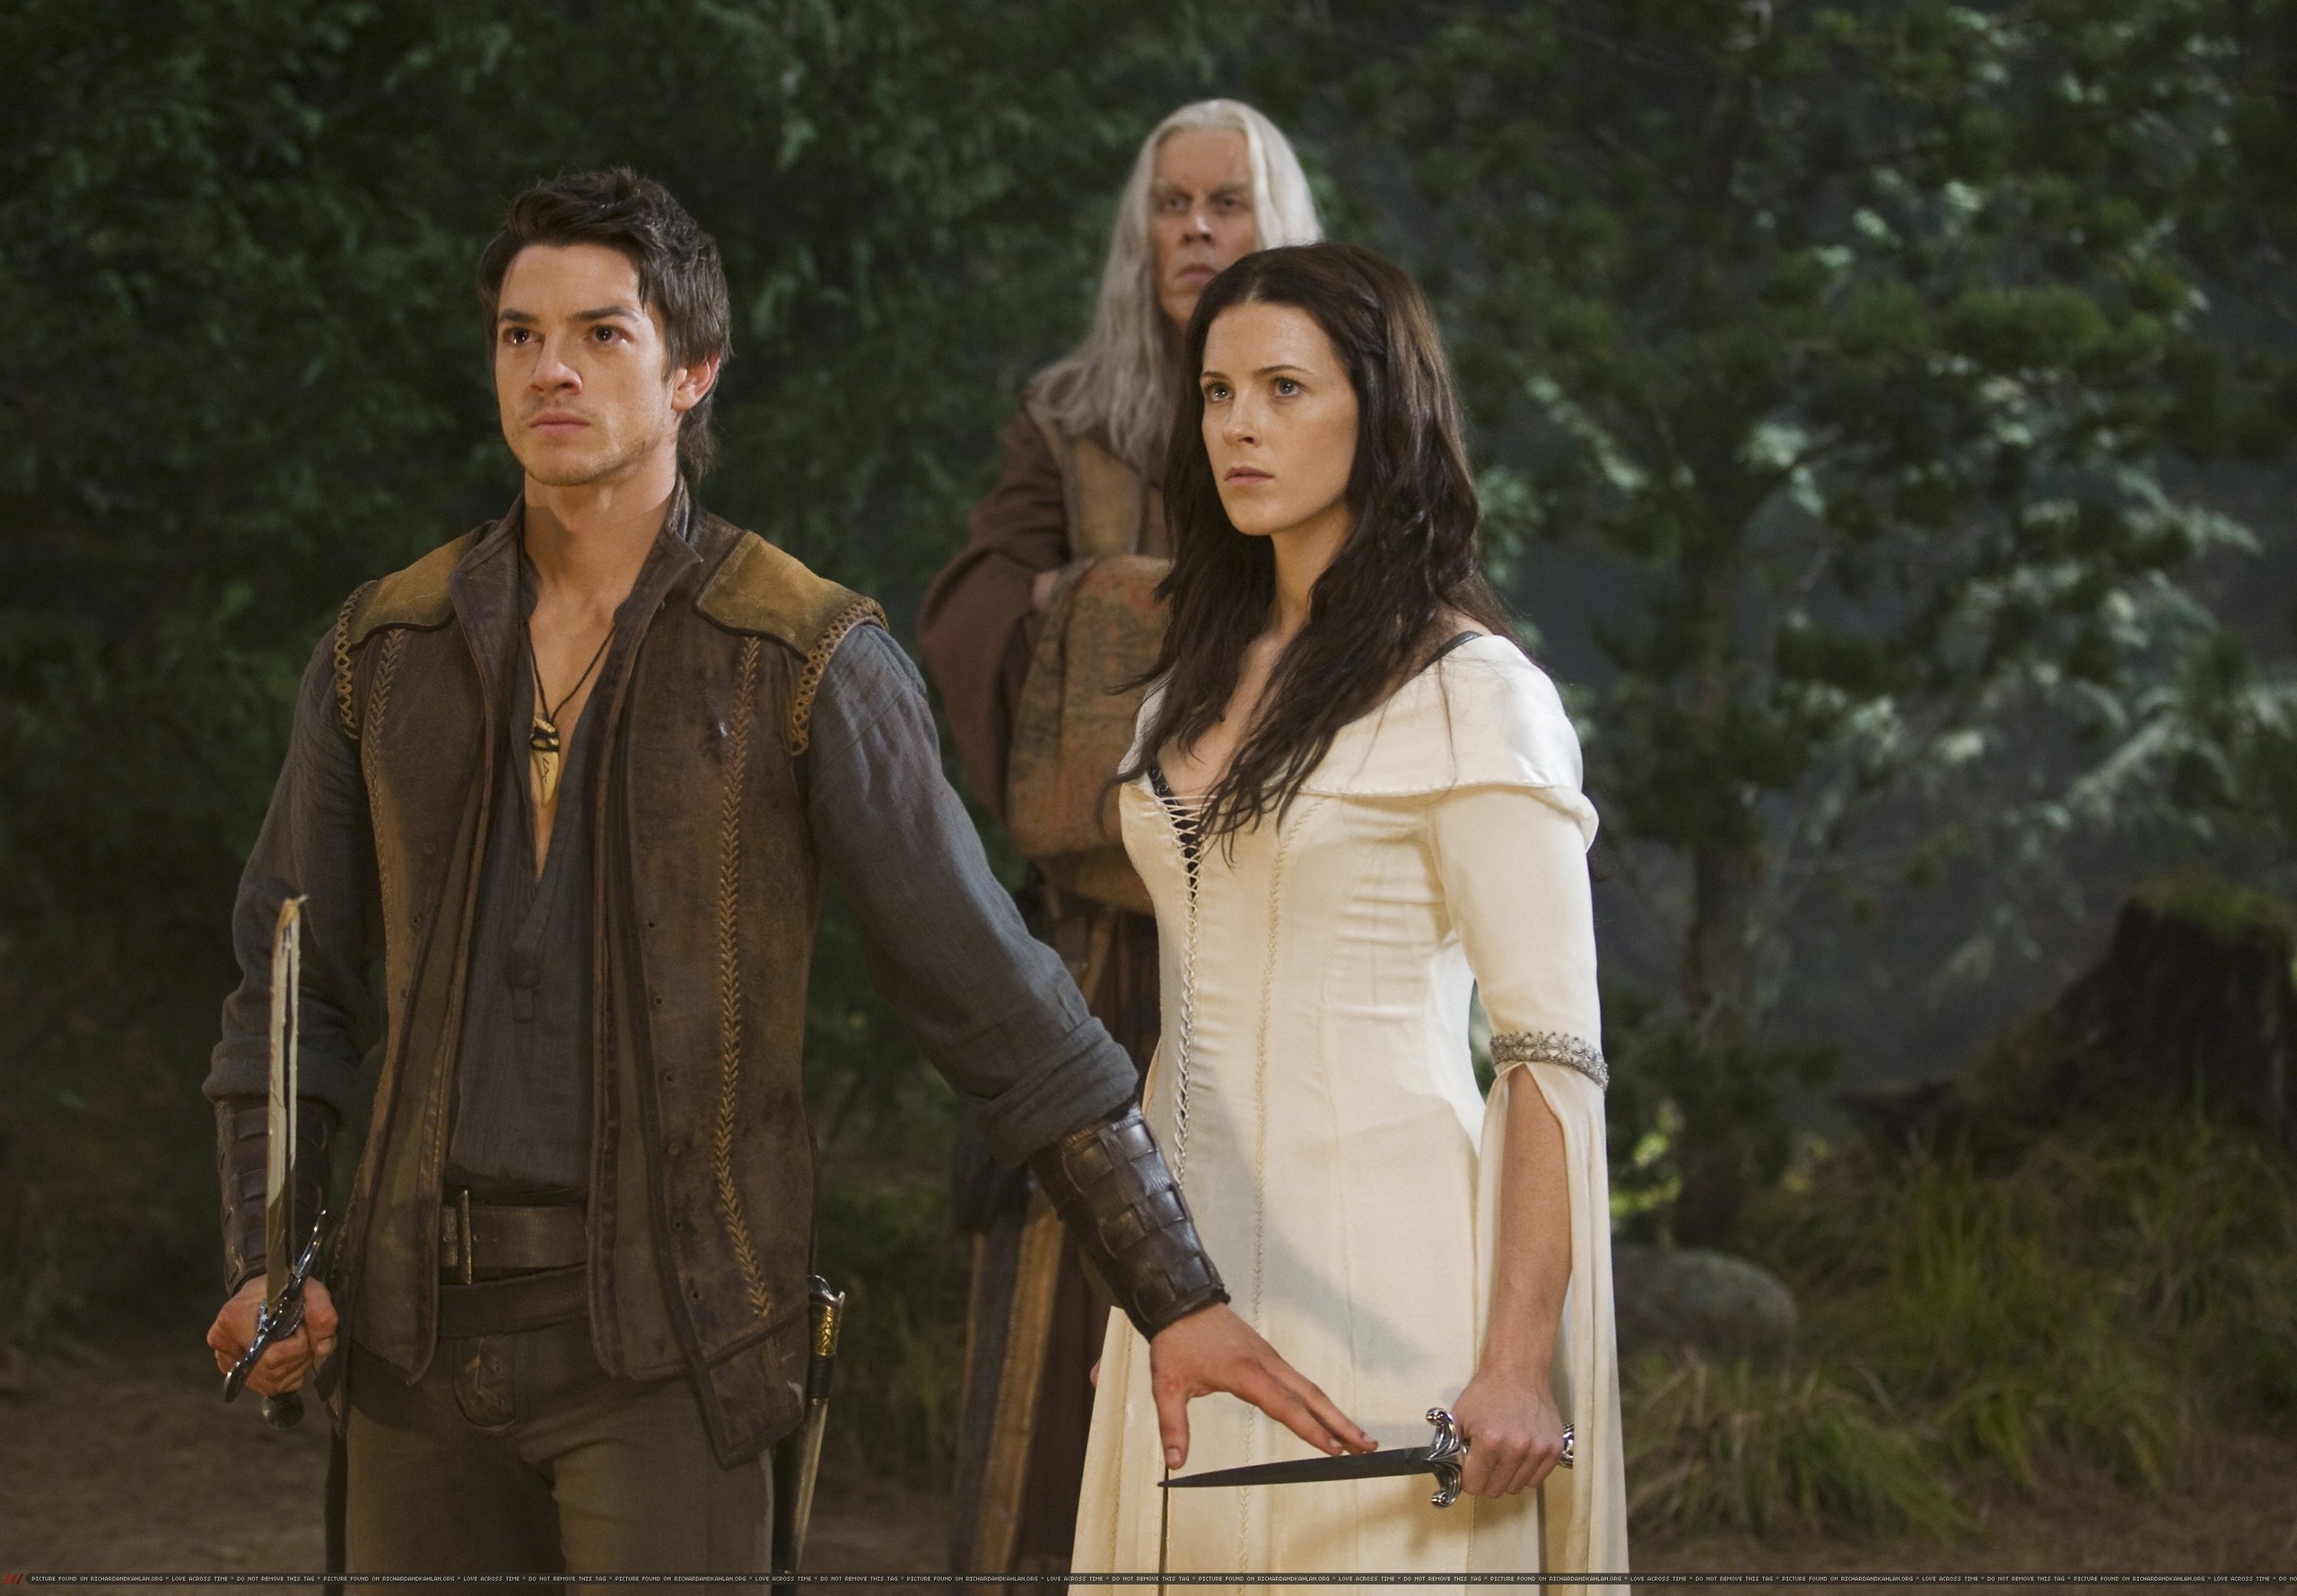 where can i watch legend of the seeker online free